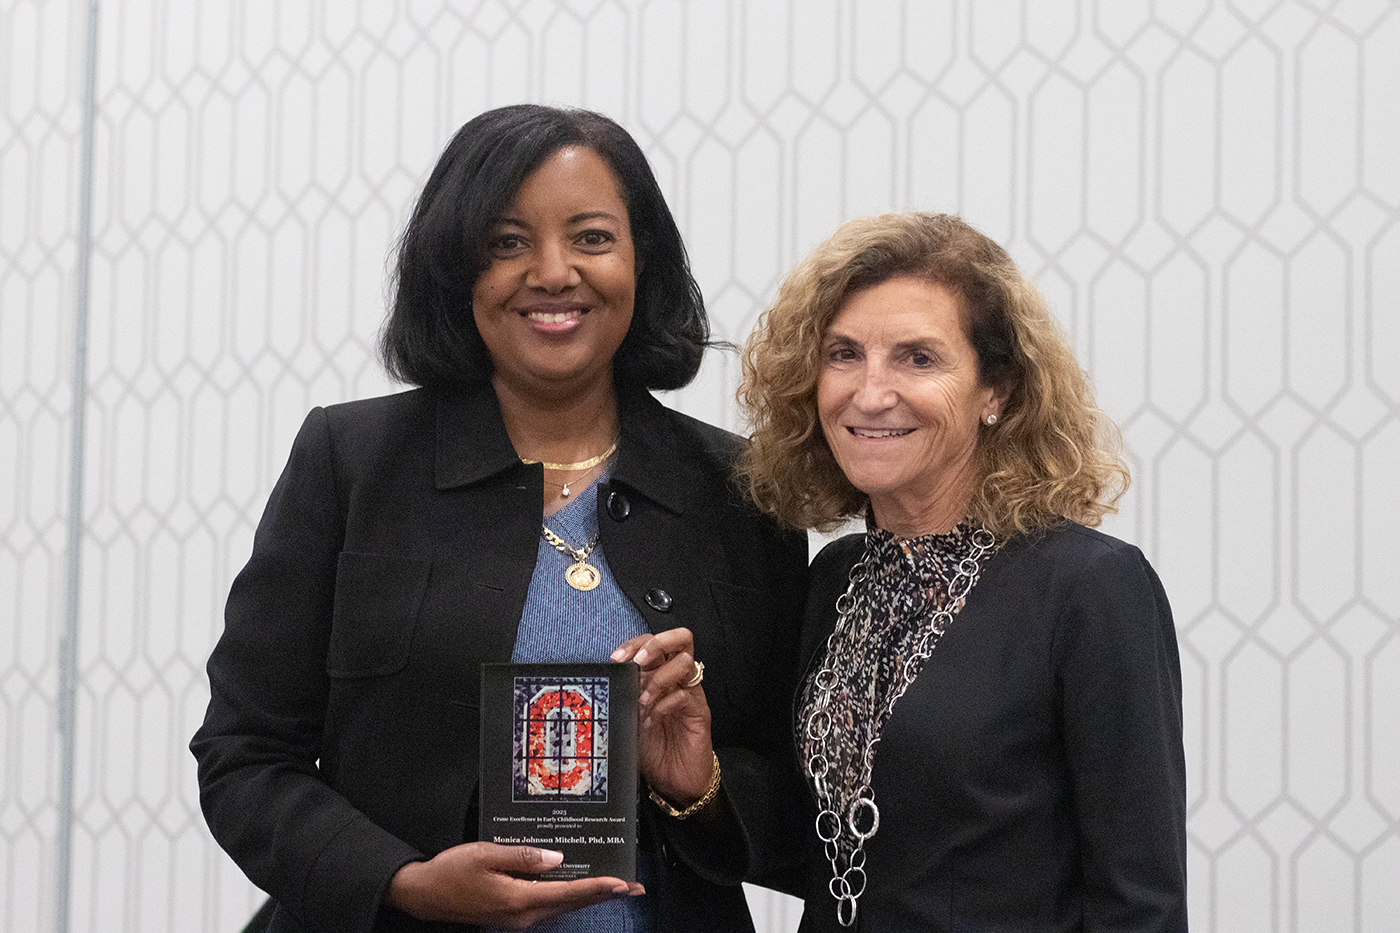 Dr. Monica Johnson Mitchell of Cincinnati Children’s Hospital, left, holds a plaque as a recipient of a Crane Excellence in Early Childhood Award as she stands next to Tanny Crane, president and CEO of Crane Group.